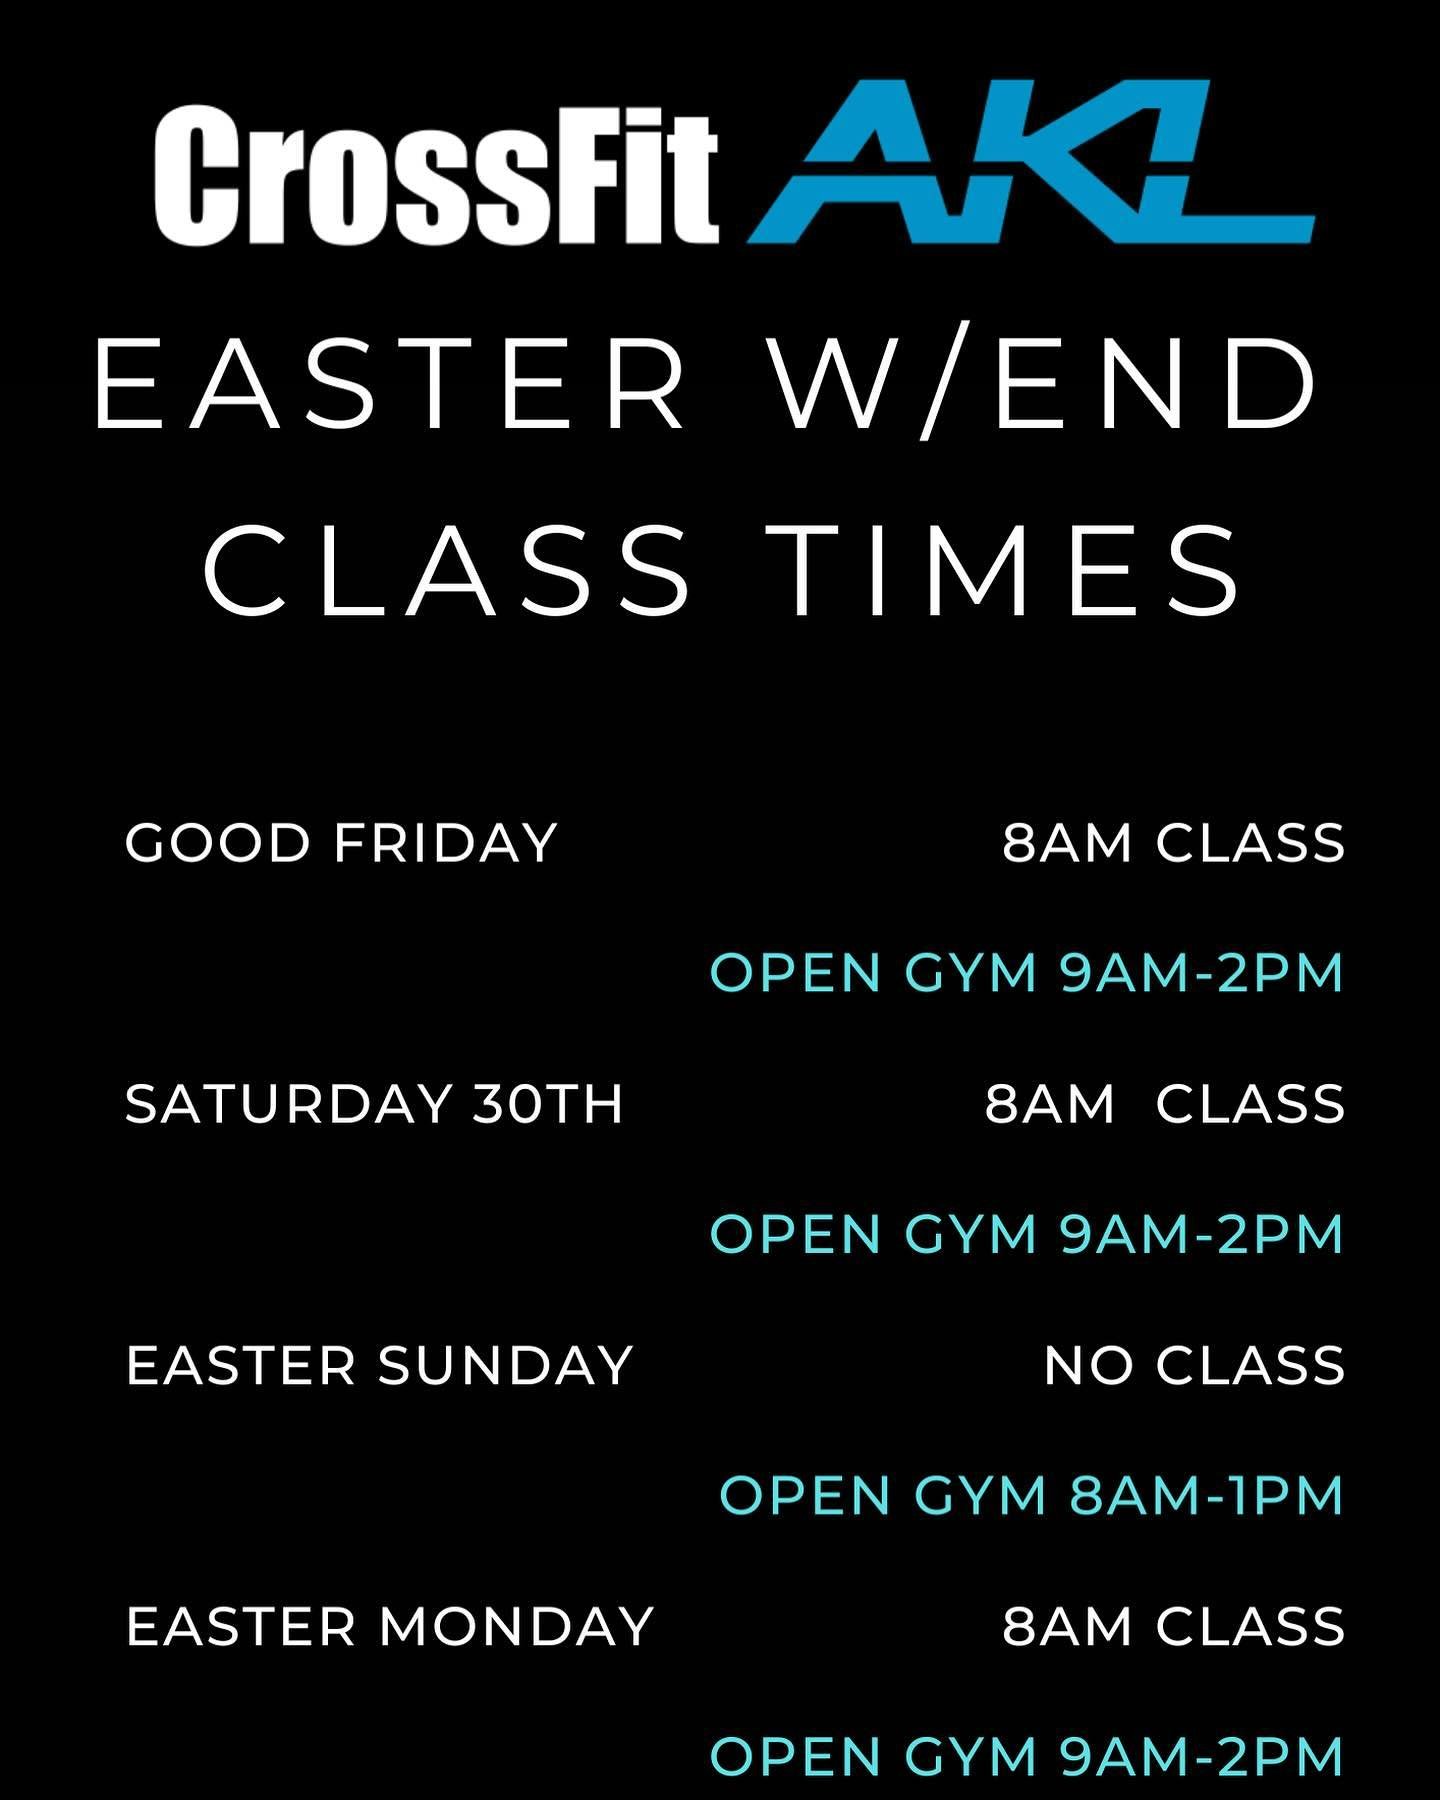 🐰Easter Timetable, Alert! 🐰
Wishing you all a fantastic Easter weekend! 🐣 If you&rsquo;re sticking around, swing by and sweat off those Easter treats with us! 💪 Check our timetable and let&rsquo;s crush those workouts together! 🥚🔥